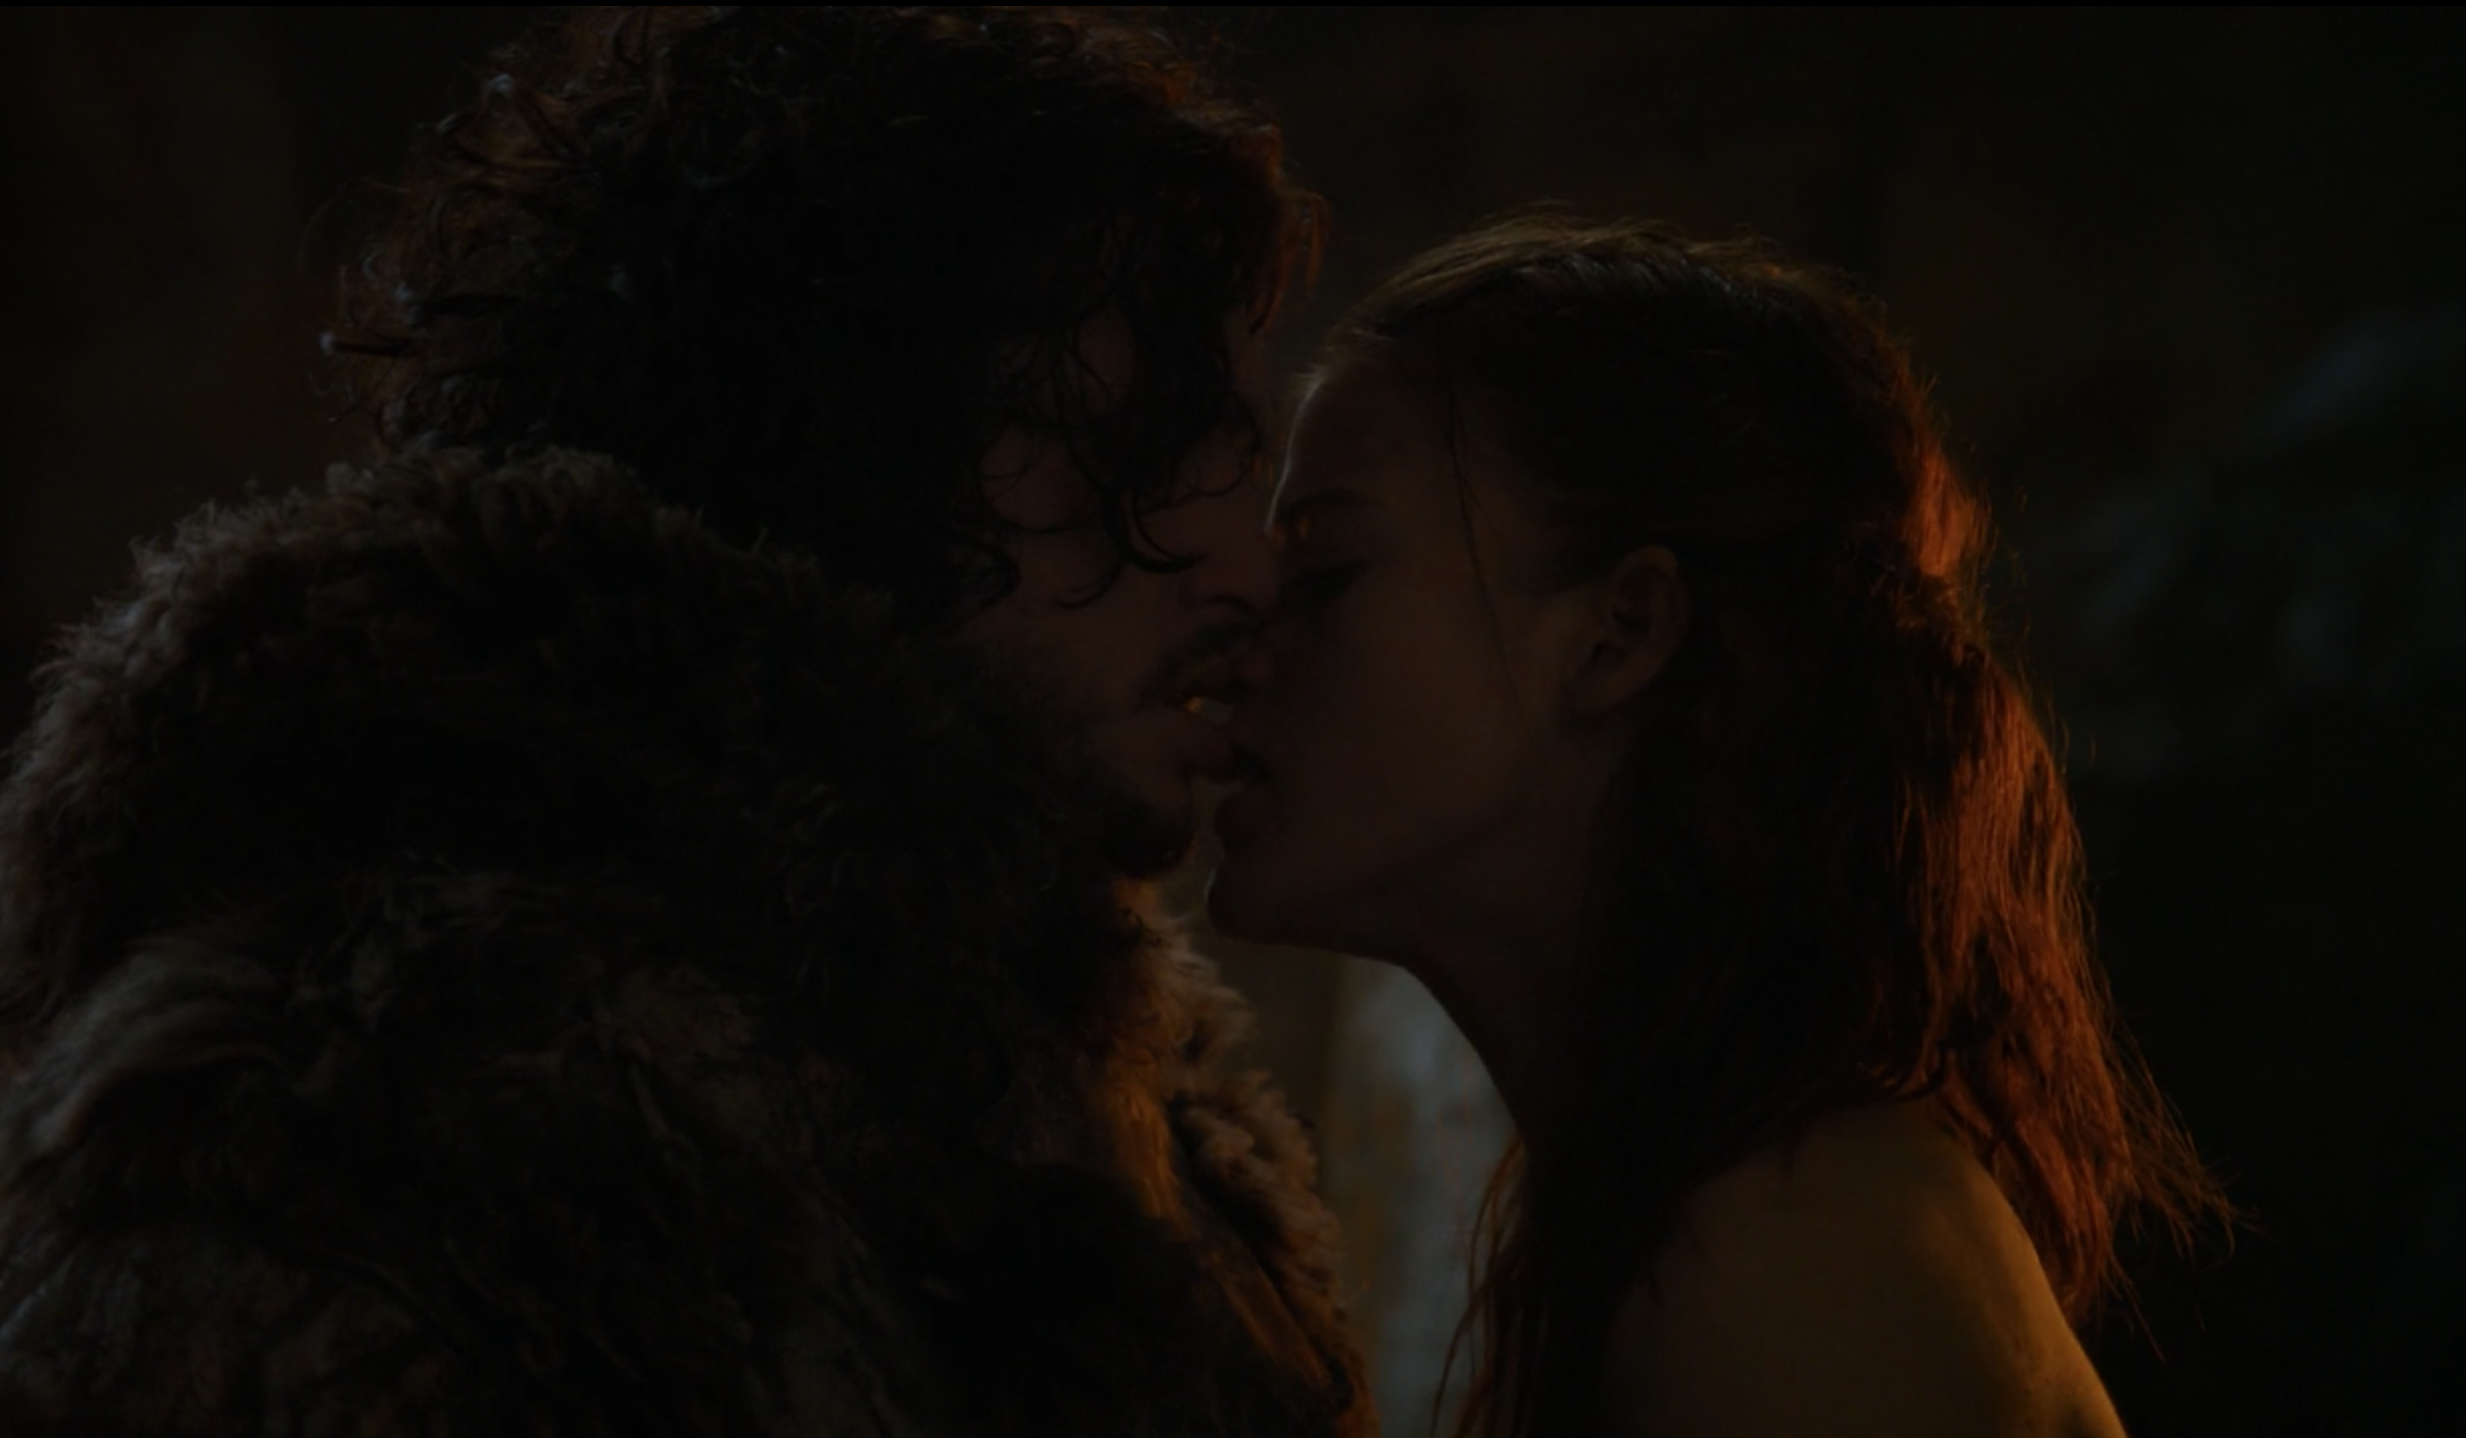 Ygritte and Jon  kissing in the cave